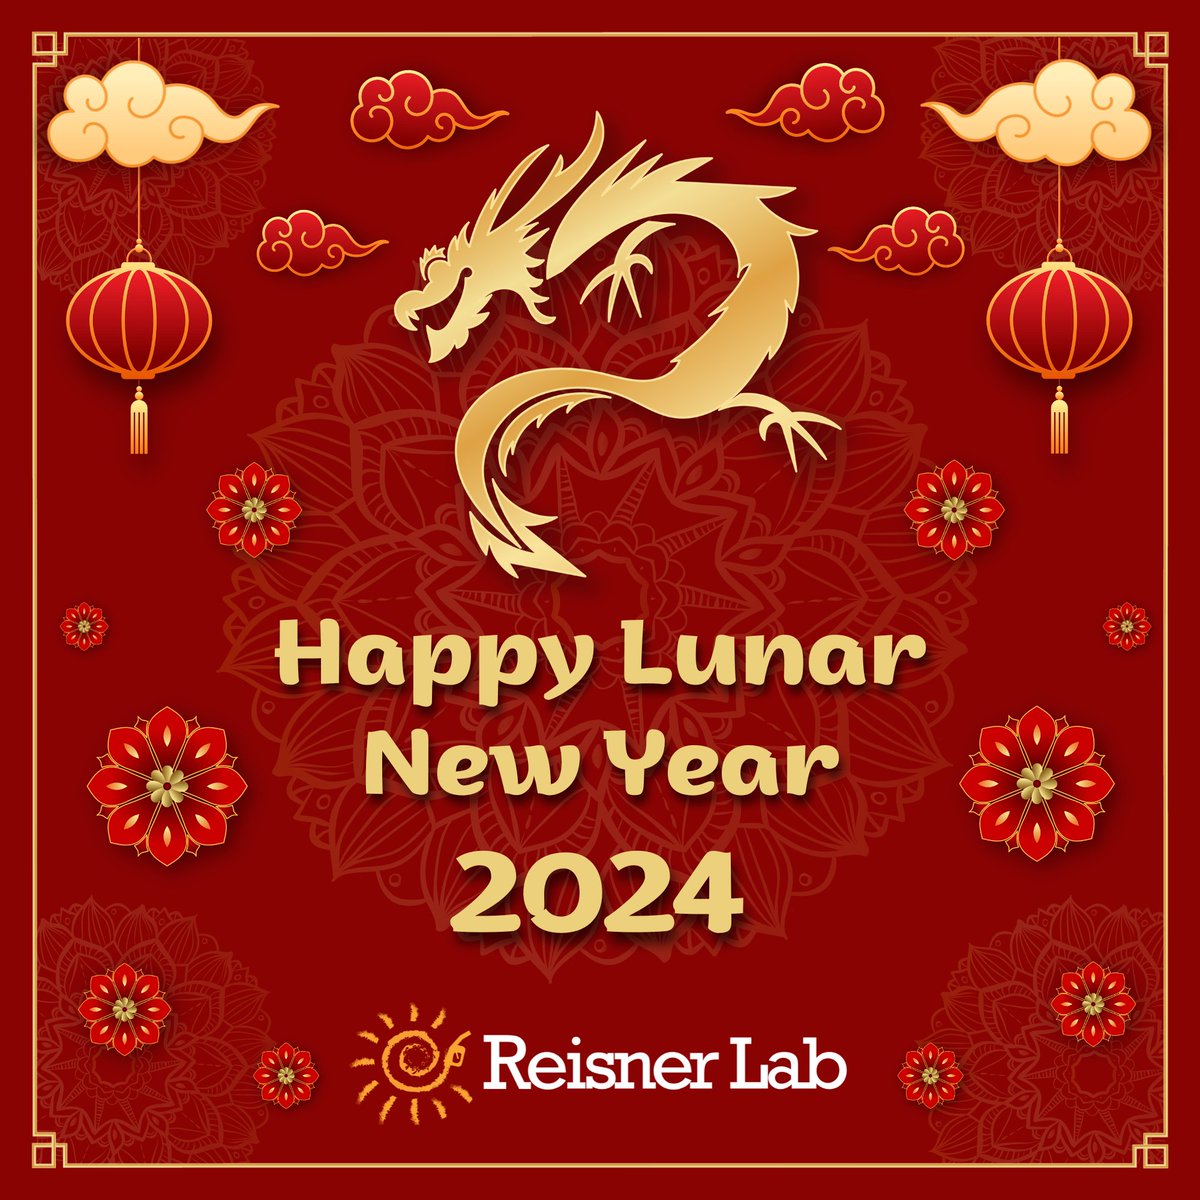 🎊The Reisner Lab wants to wish everyone celebrating an amazing Chinese New Year’s Eve!🎊 May the dragon bring all of you happiness and well-being in this year to come! 🐉🔴